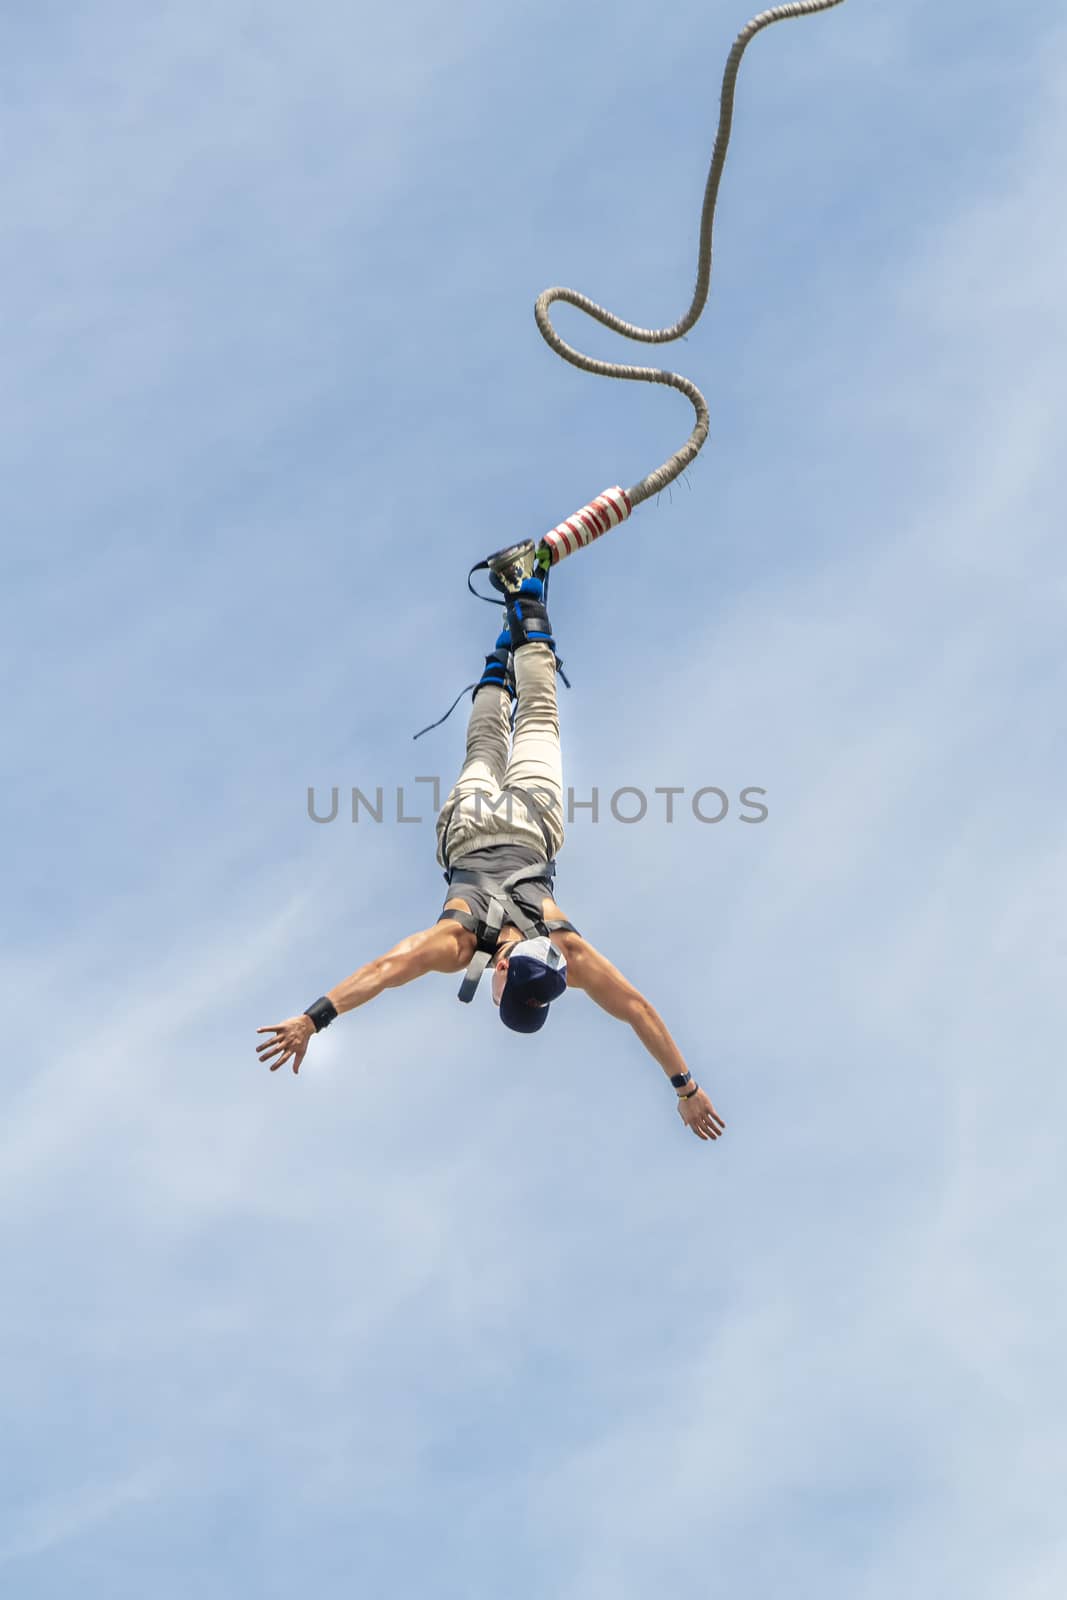 Bungee jumper jump from a platform hanging on the crane into the water against a pur blue spring sky of The Hague, Netherlands by ankorlight